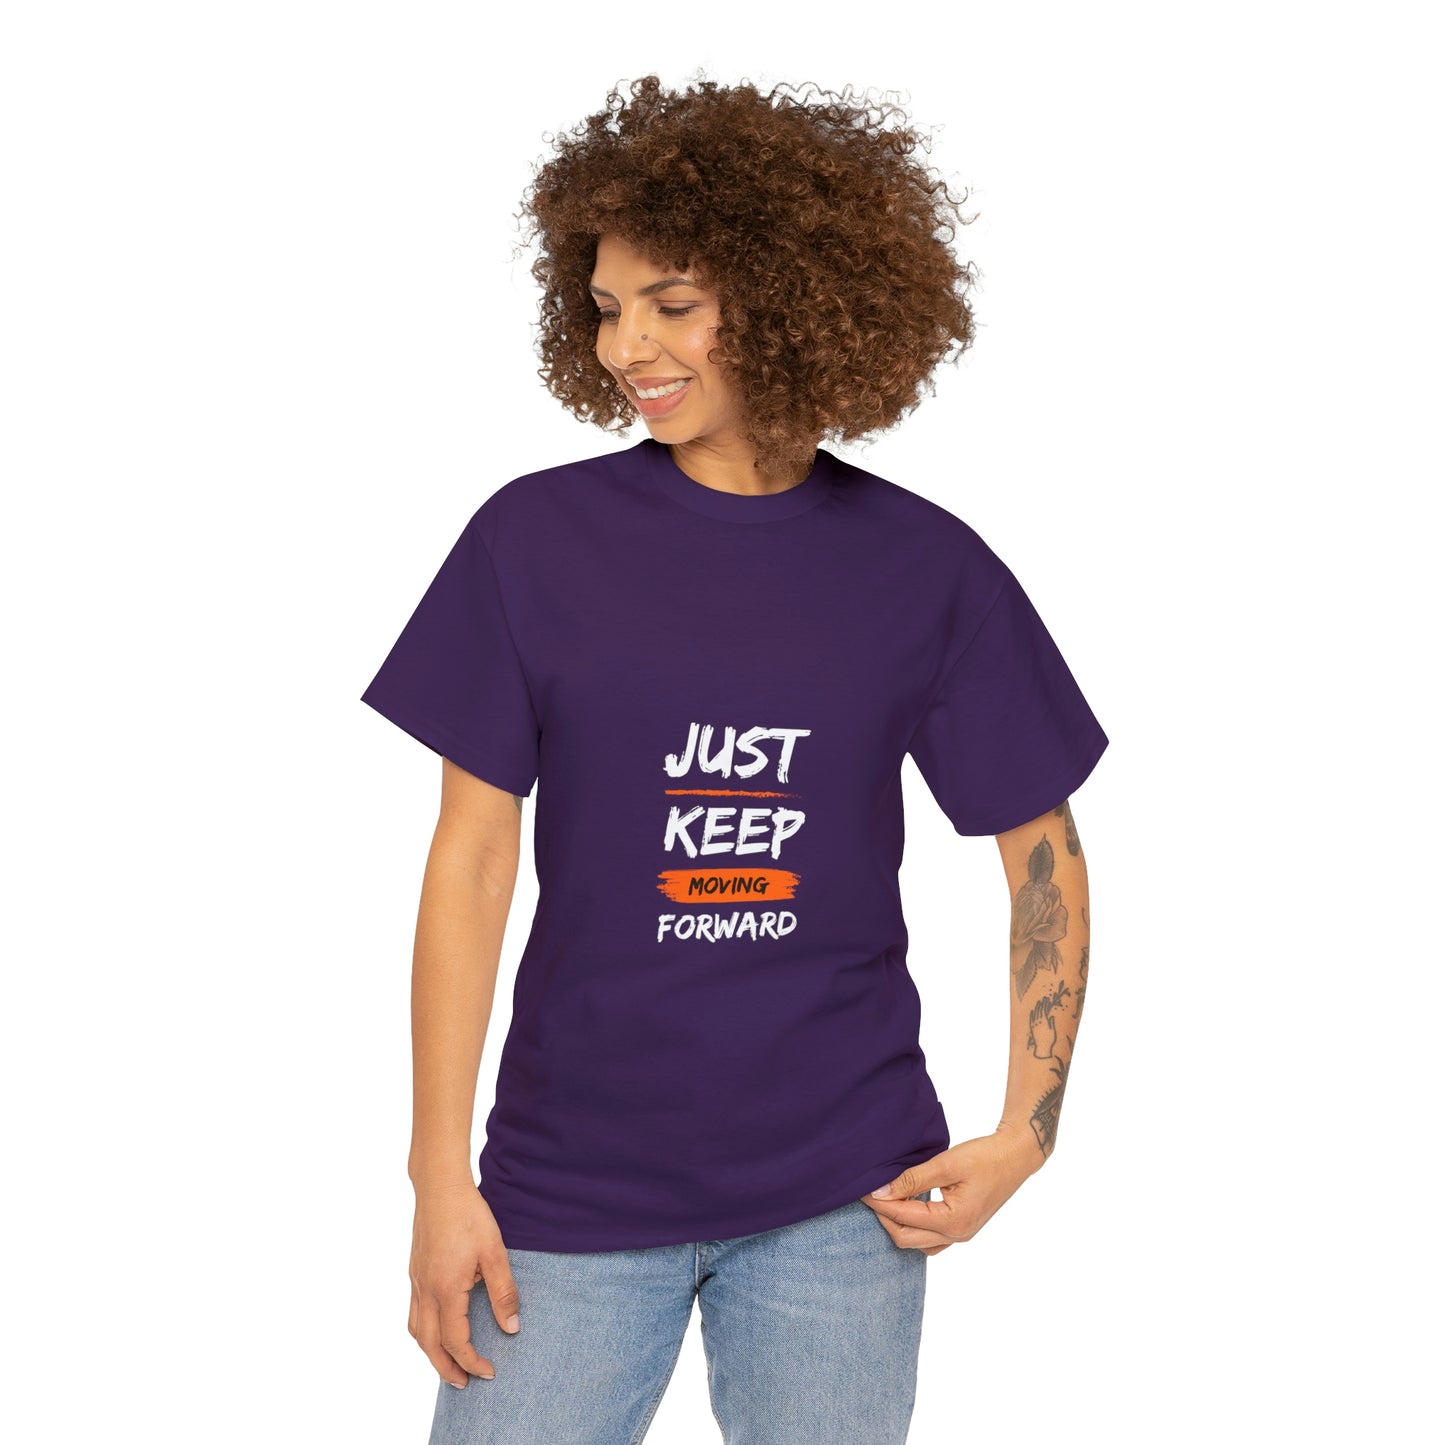 Keep moving forward Your Style  Our Custom Printed Tee Unique Design Comfortable Fit  Personalized for You.  color, funny tshirt tee shirt